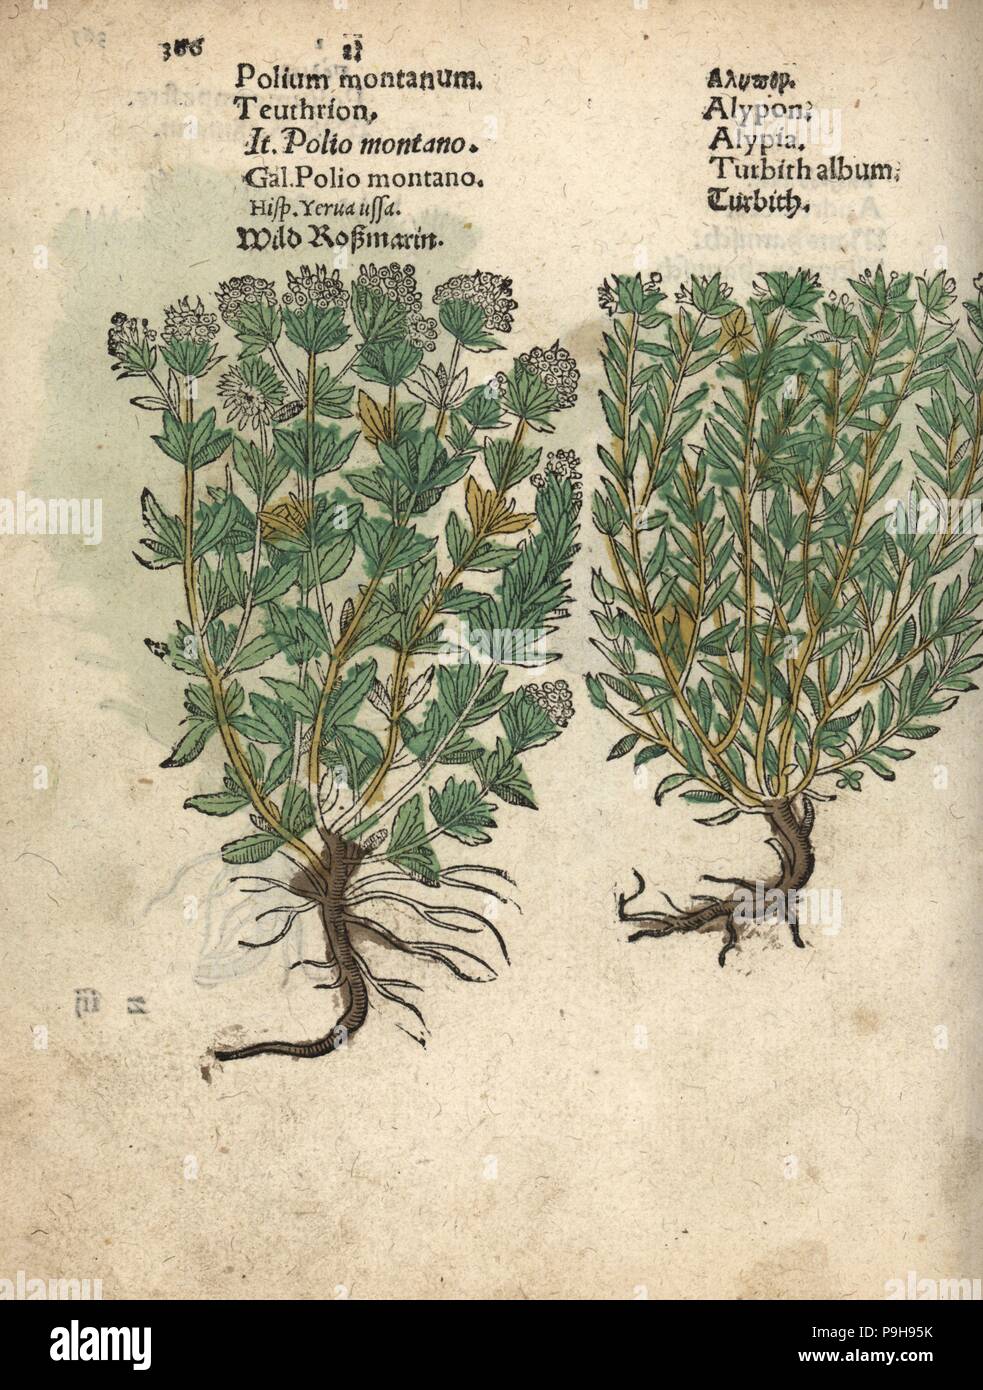 Mountain germander, Teucrium montanum, and turpeth, Operculina turpethum. Handcoloured woodblock engraving of a botanical illustration from Adam Lonicer's Krauterbuch, or Herbal, Frankfurt, 1557. This from a 17th century pirate edition or atlas of illustrations only, with captions in Latin, Greek, French, Italian, German, and in English manuscript. Stock Photo